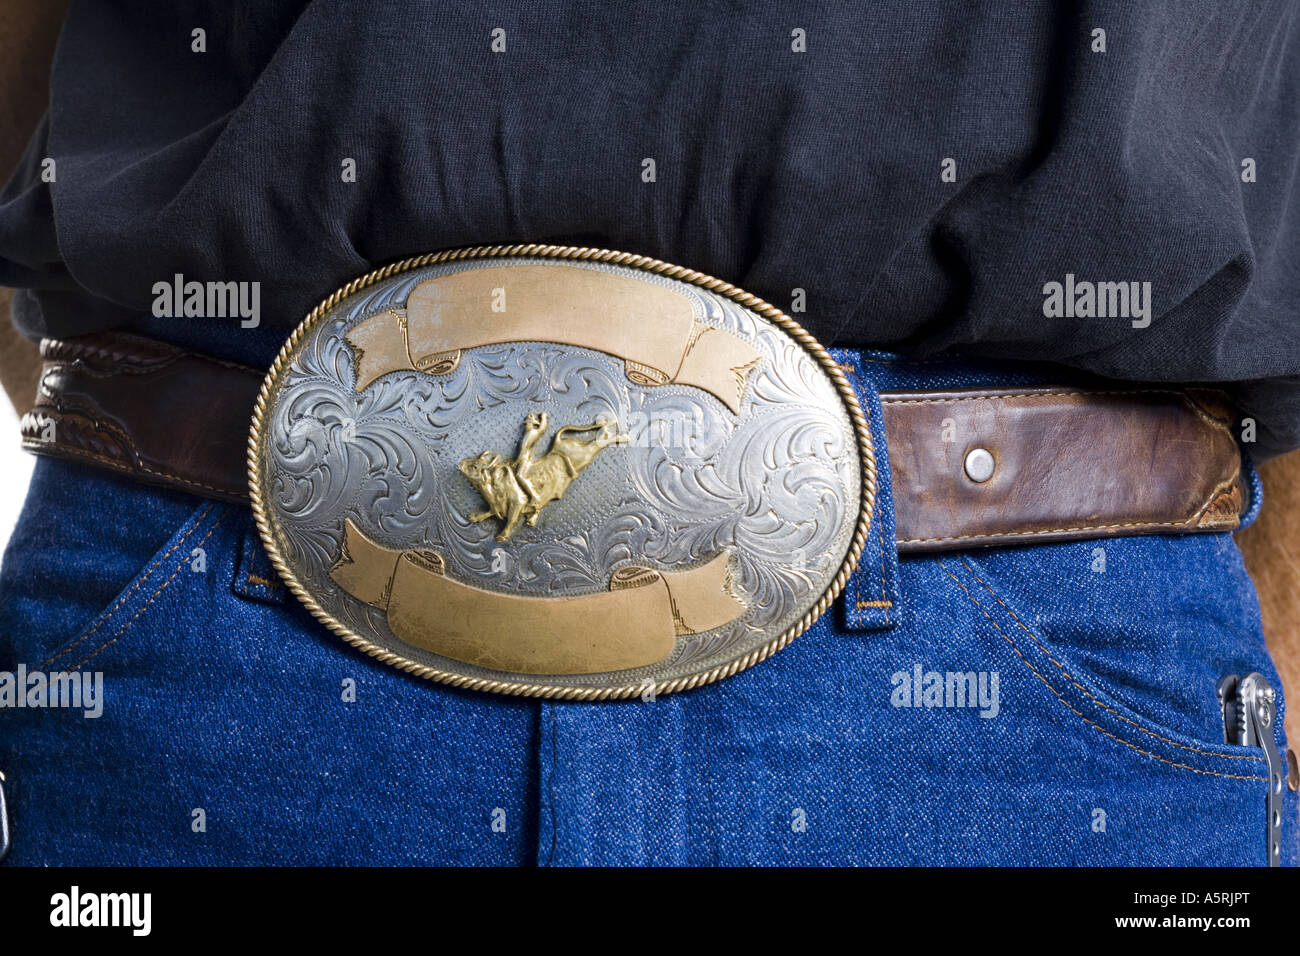 Big Belt Buckle High Resolution Stock Photography and Images - Alamy